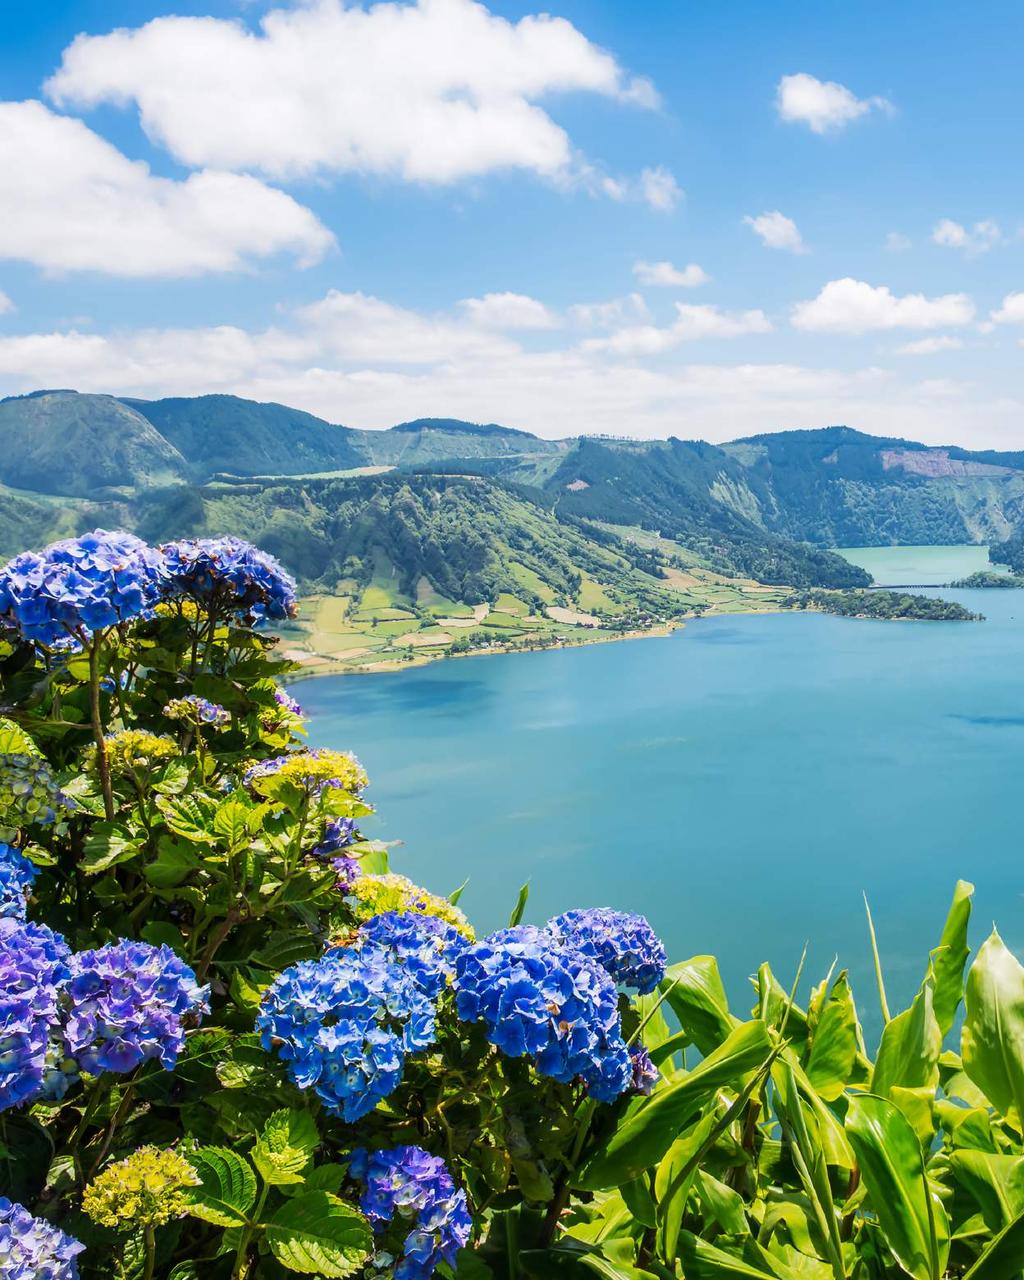 CLOCKWISE FROM THIS IMAGE: Looking out at the blue and green volcanic lakes of Sete Cidades; The colours of the Conceição Palace in Ponta Delgada are faithful to the landscape; The